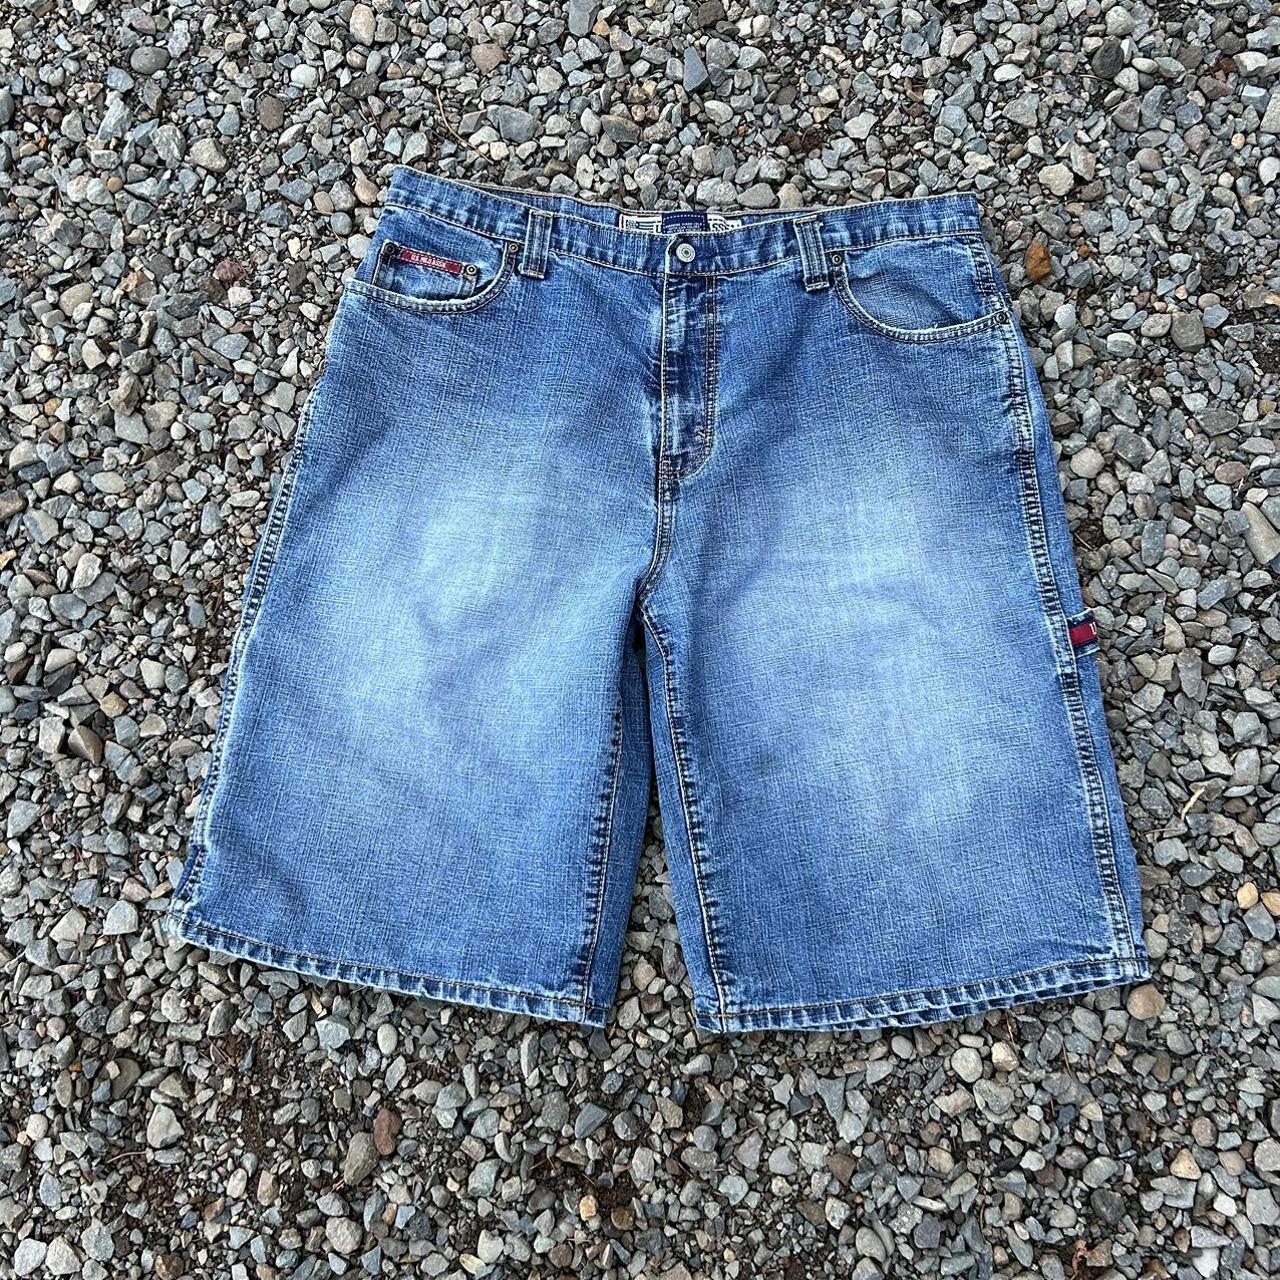 Polo ASSN. Jorts Tagged size 38 Dimensions 19... - Depop